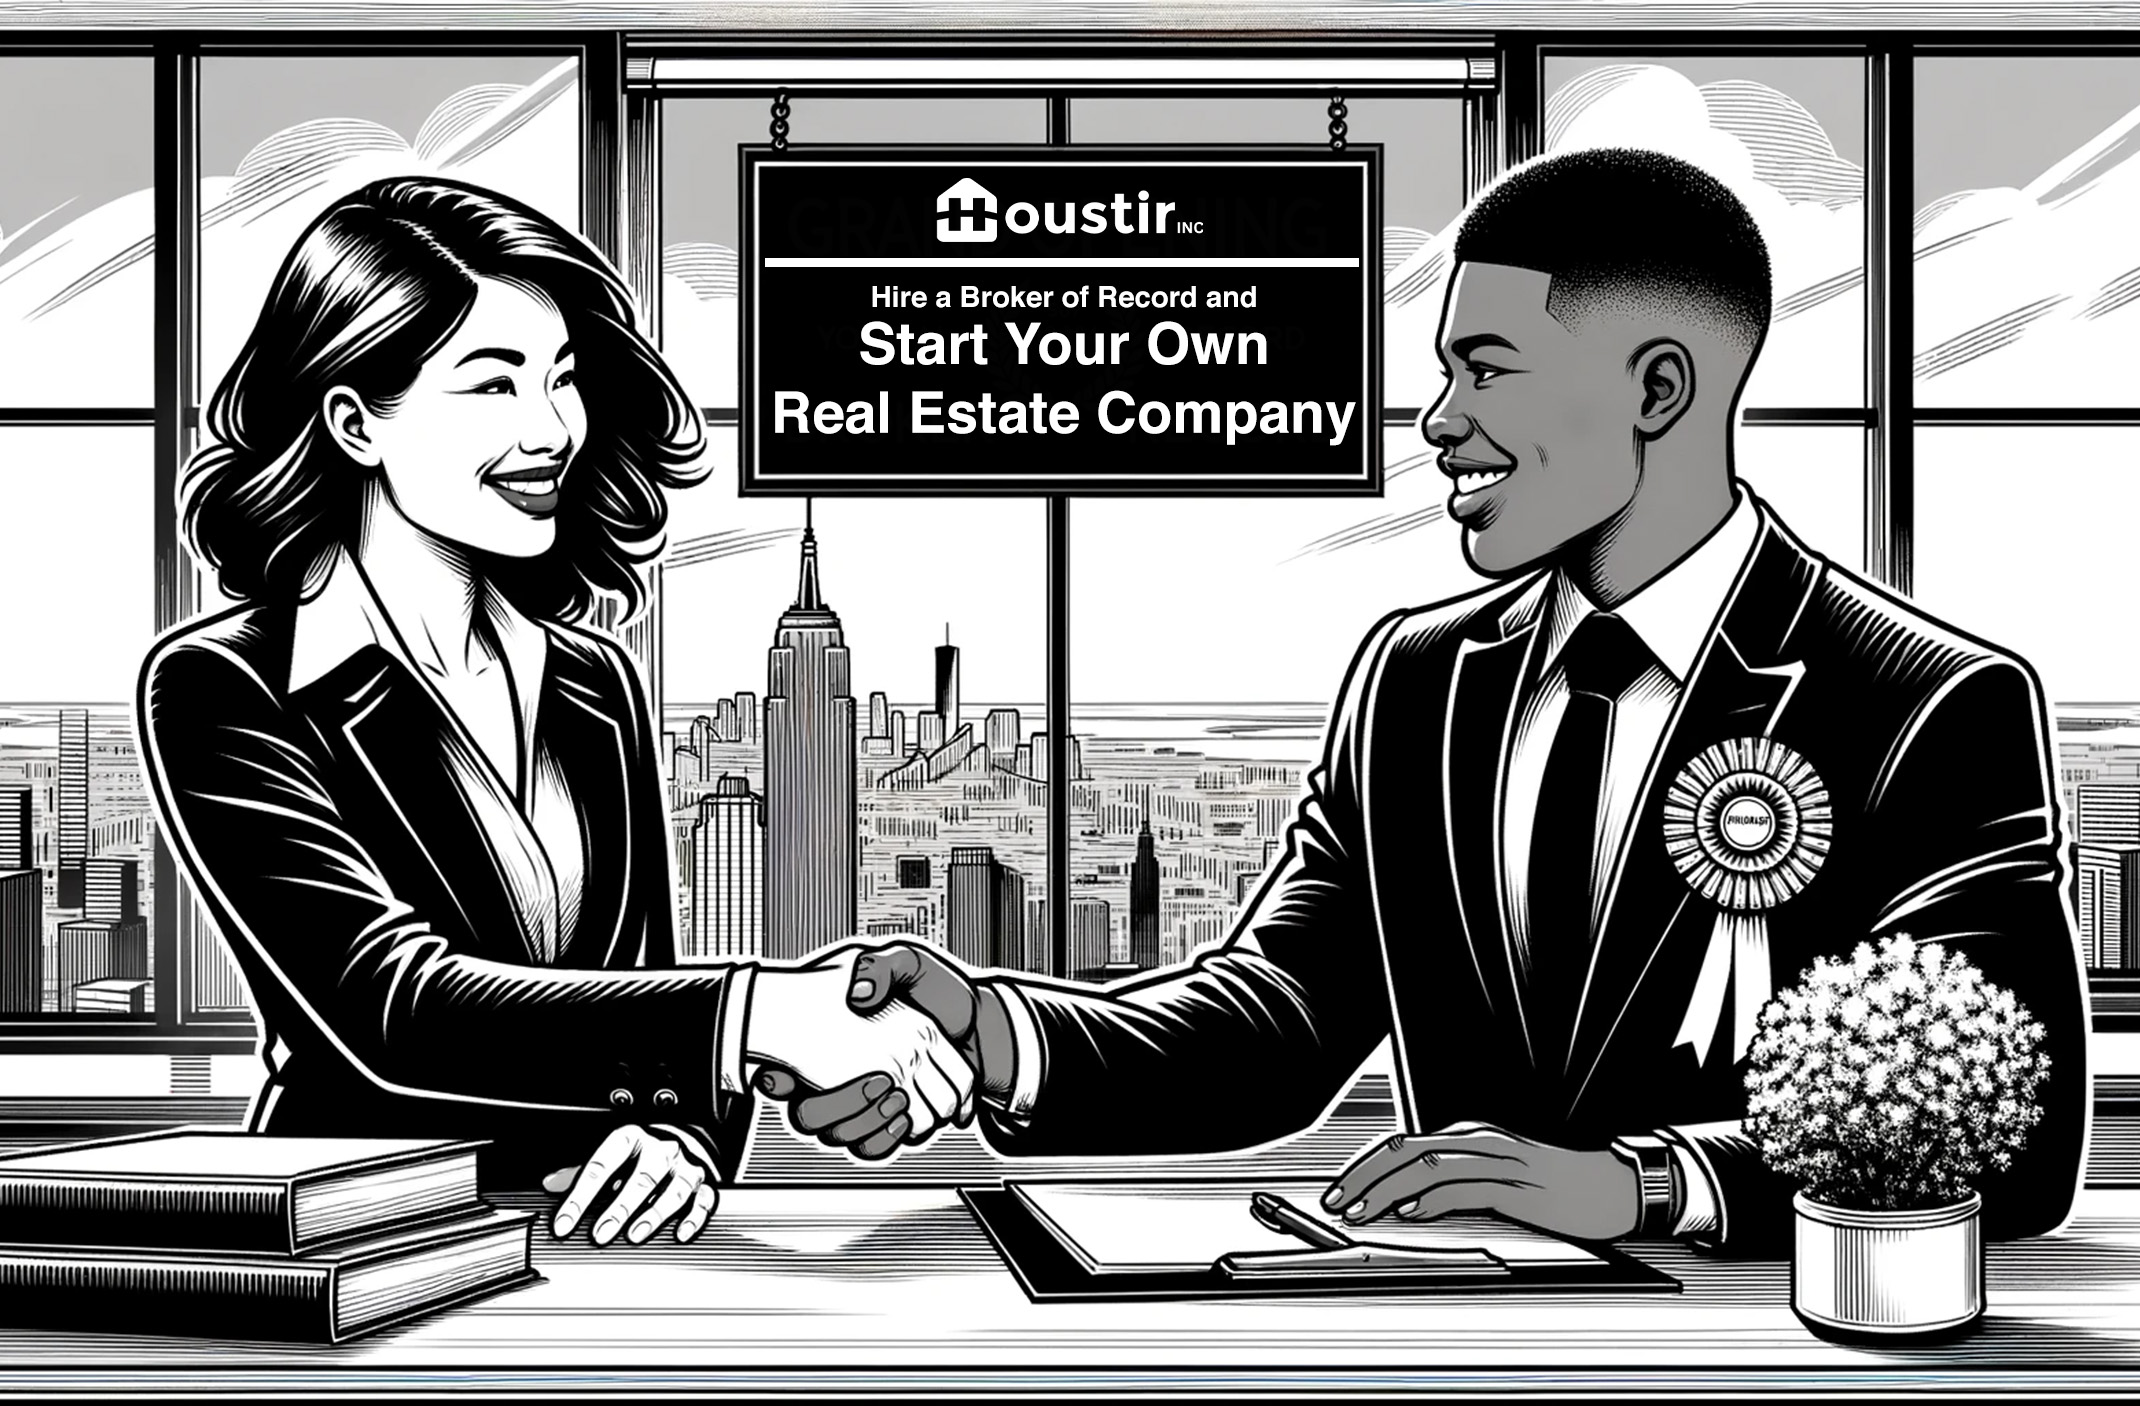 Hire a Broker of Record and Start Your Own Real Estate Company